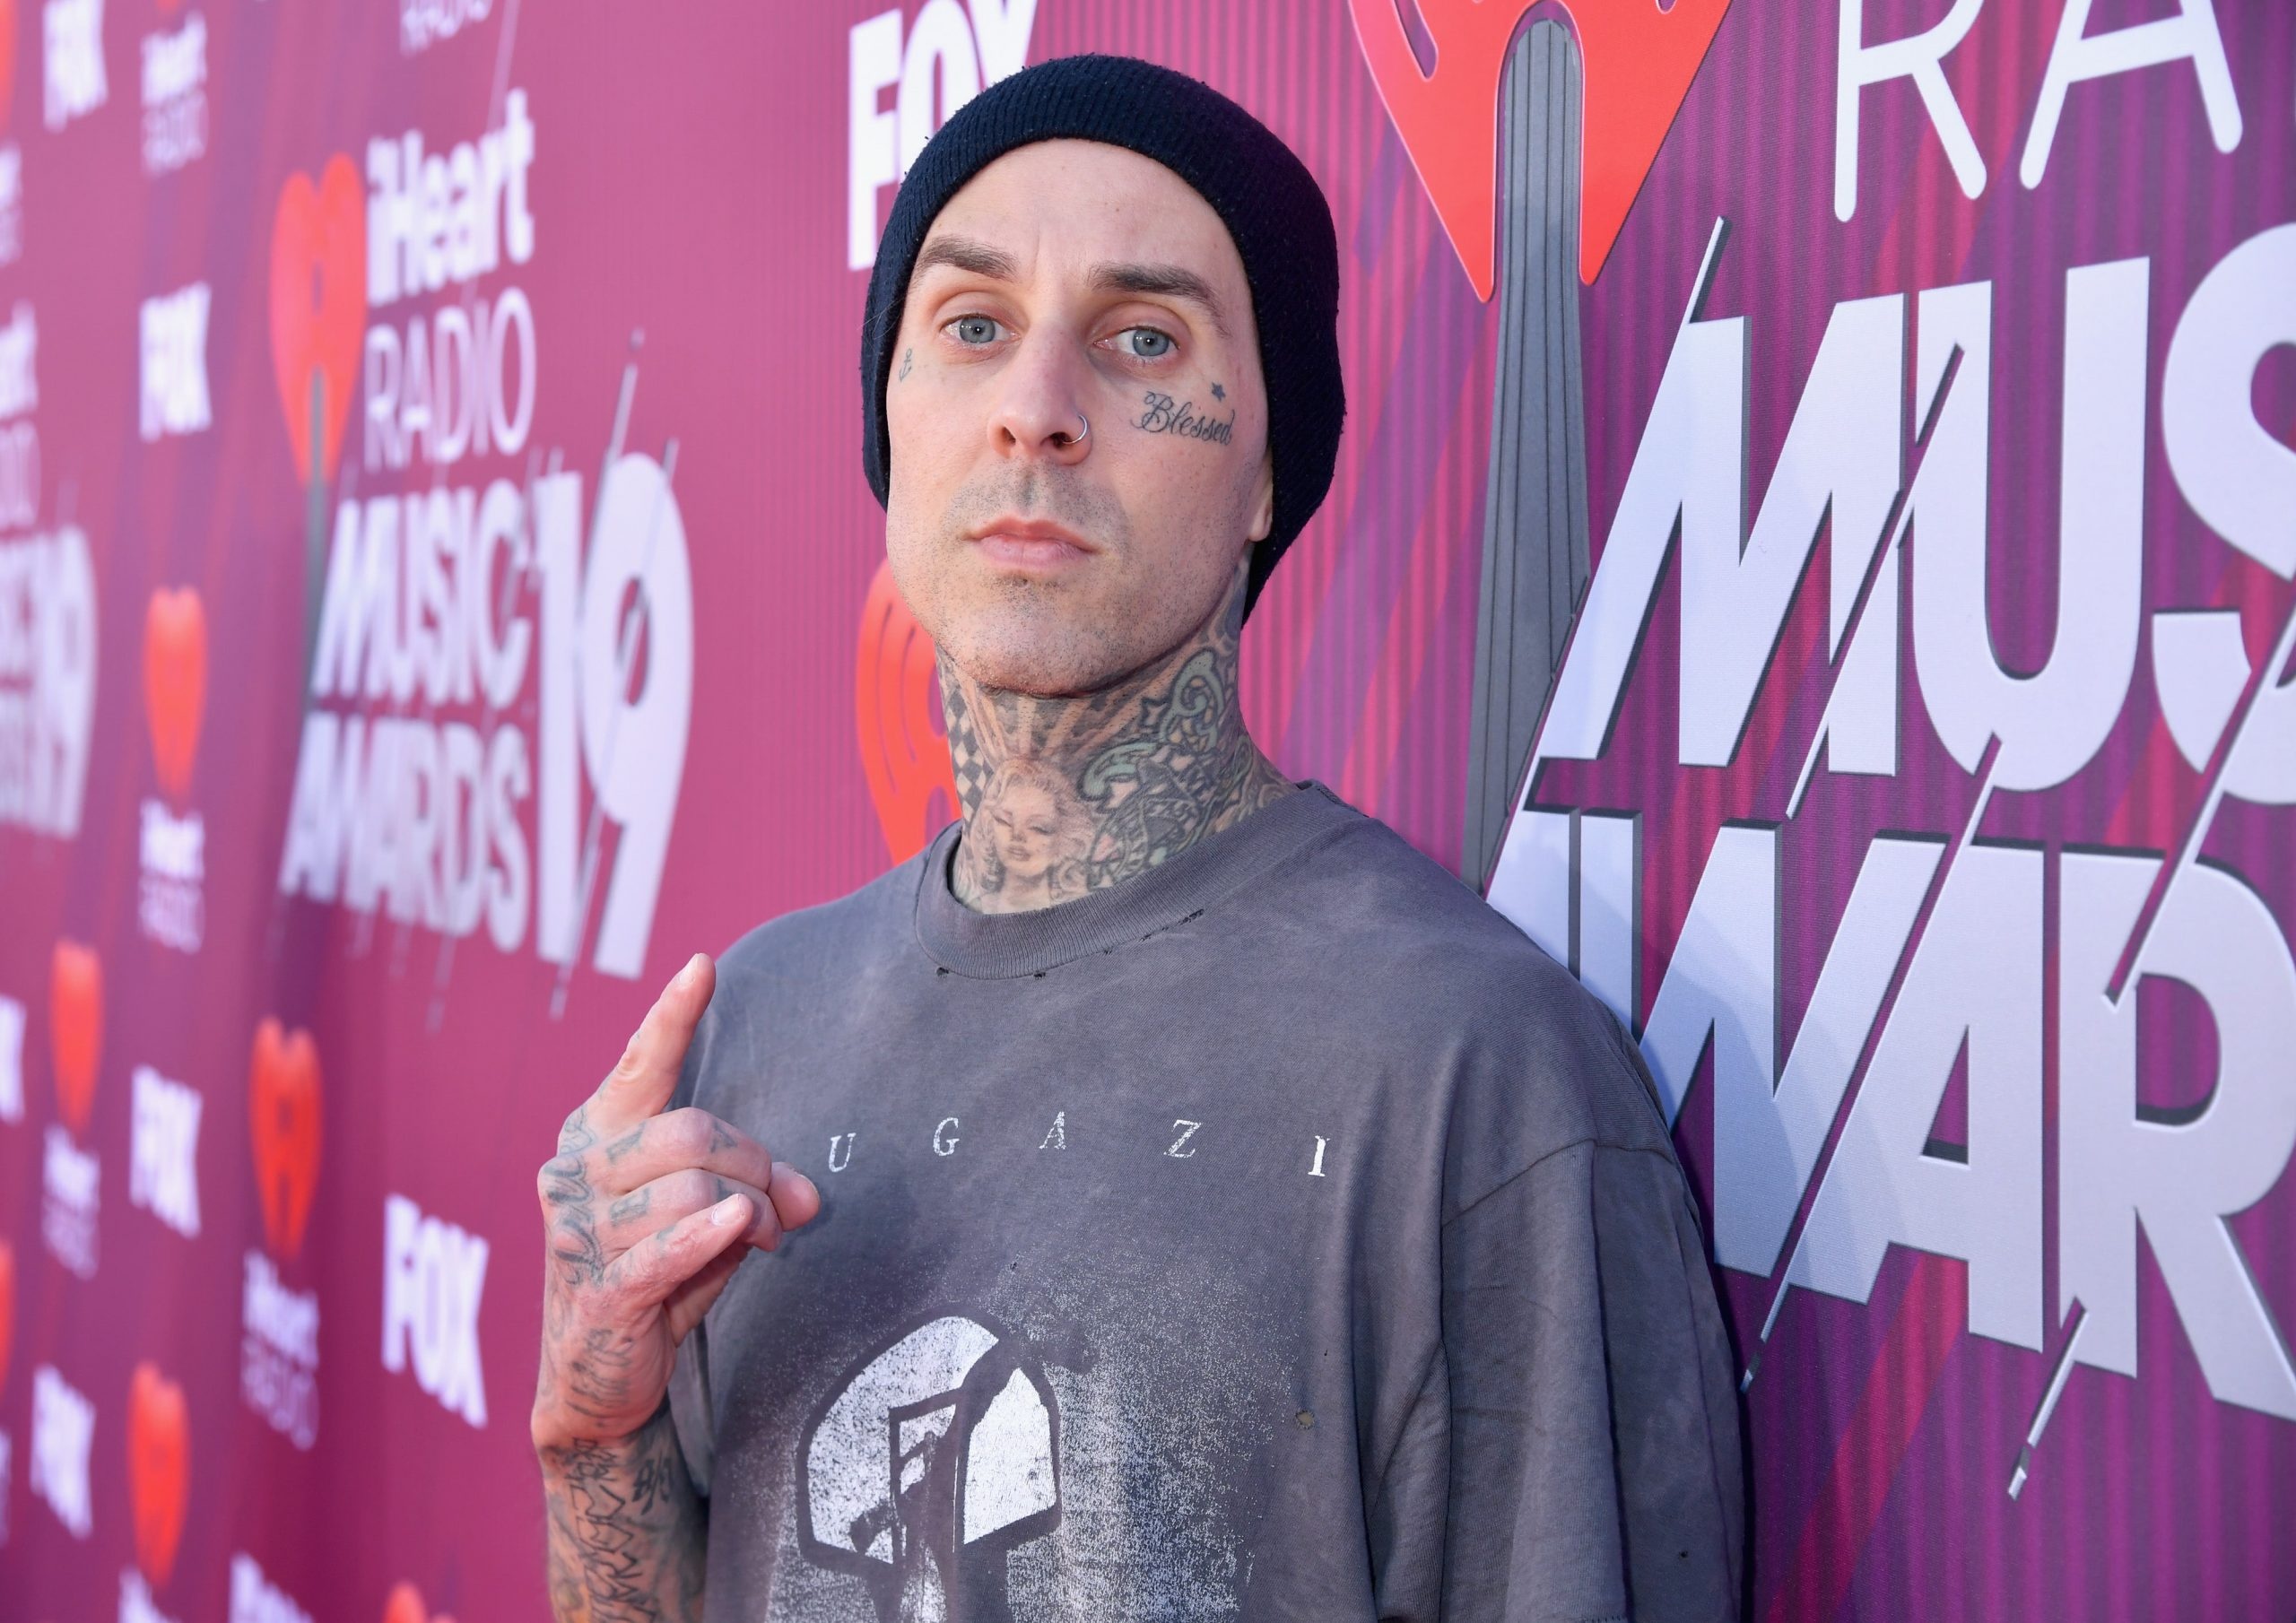 Travis Barker, drummer for Blink-182, Drumming expertise, Contributions to the band's sound, Drum magazine features, 2560x1810 HD Desktop